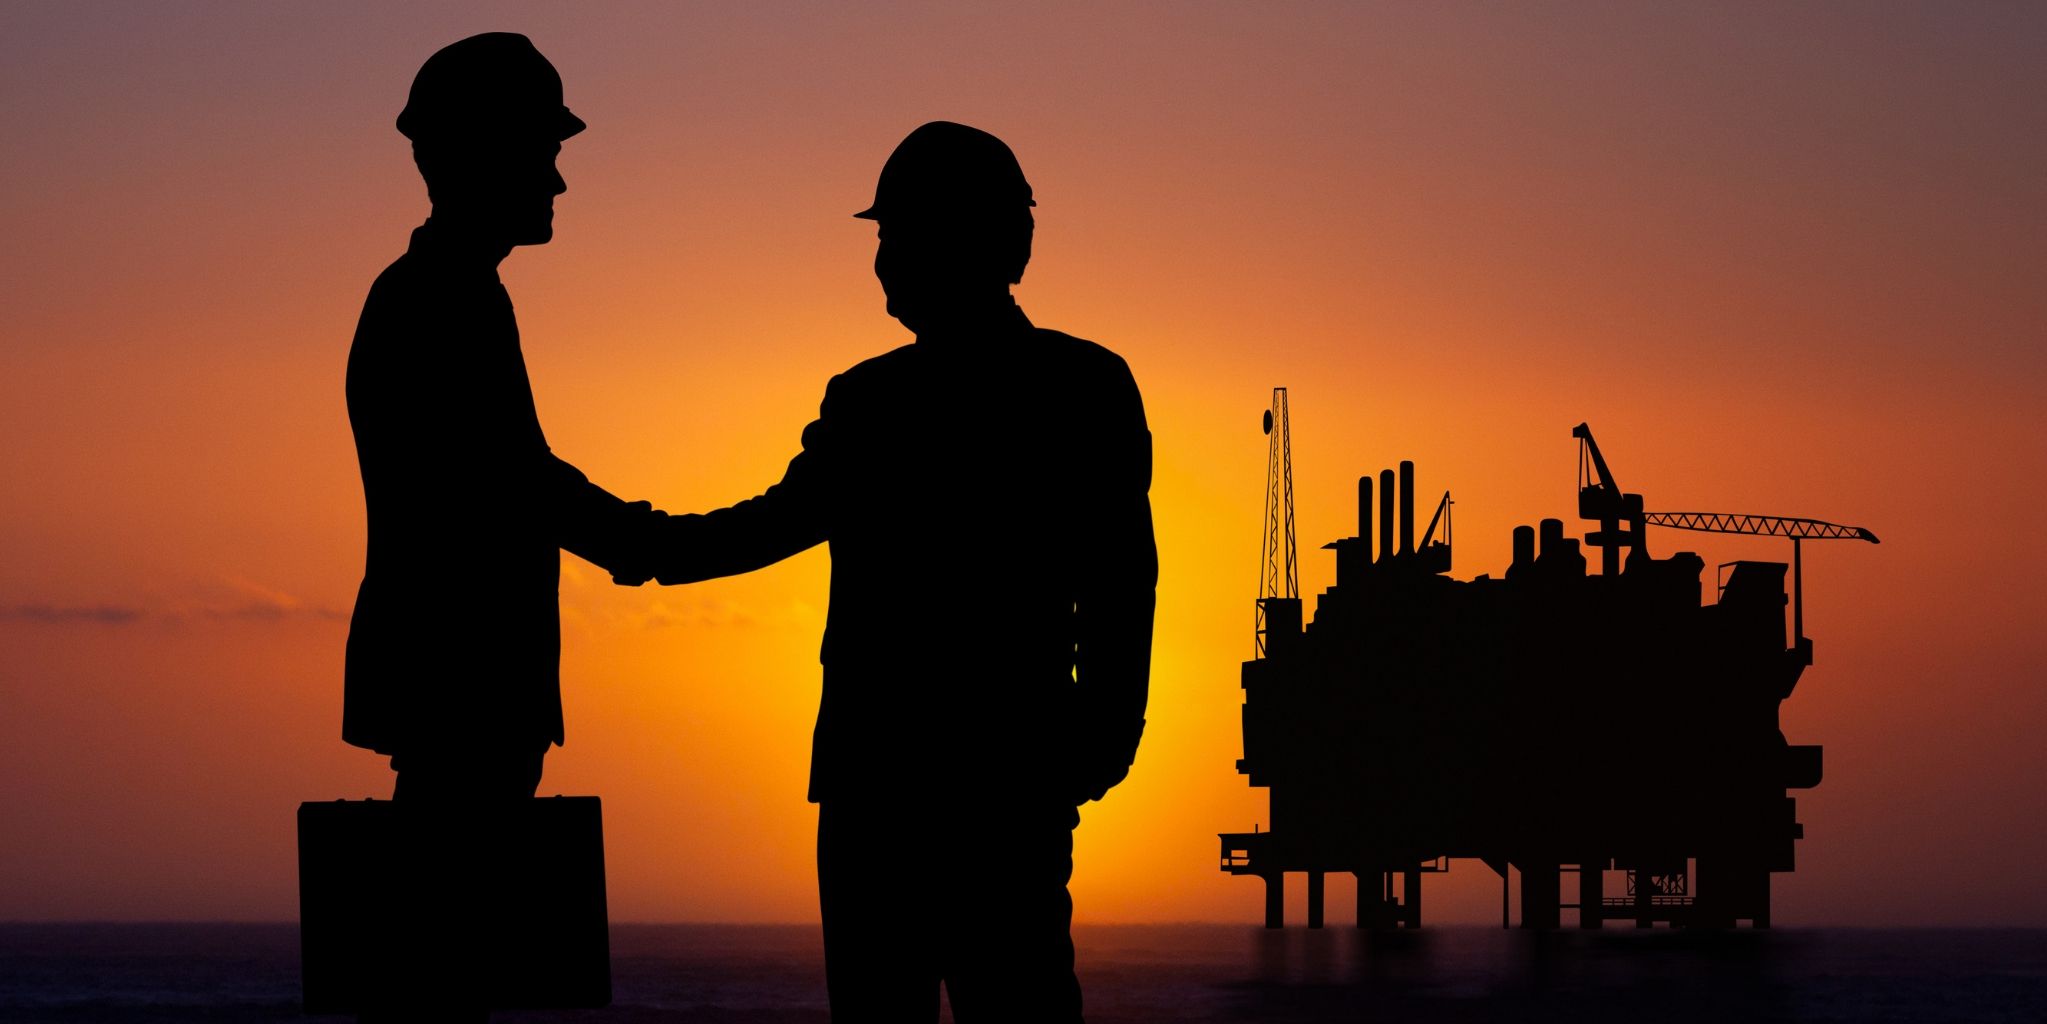 Two men shaking hands at sunset with an offshore oil rig in the background.